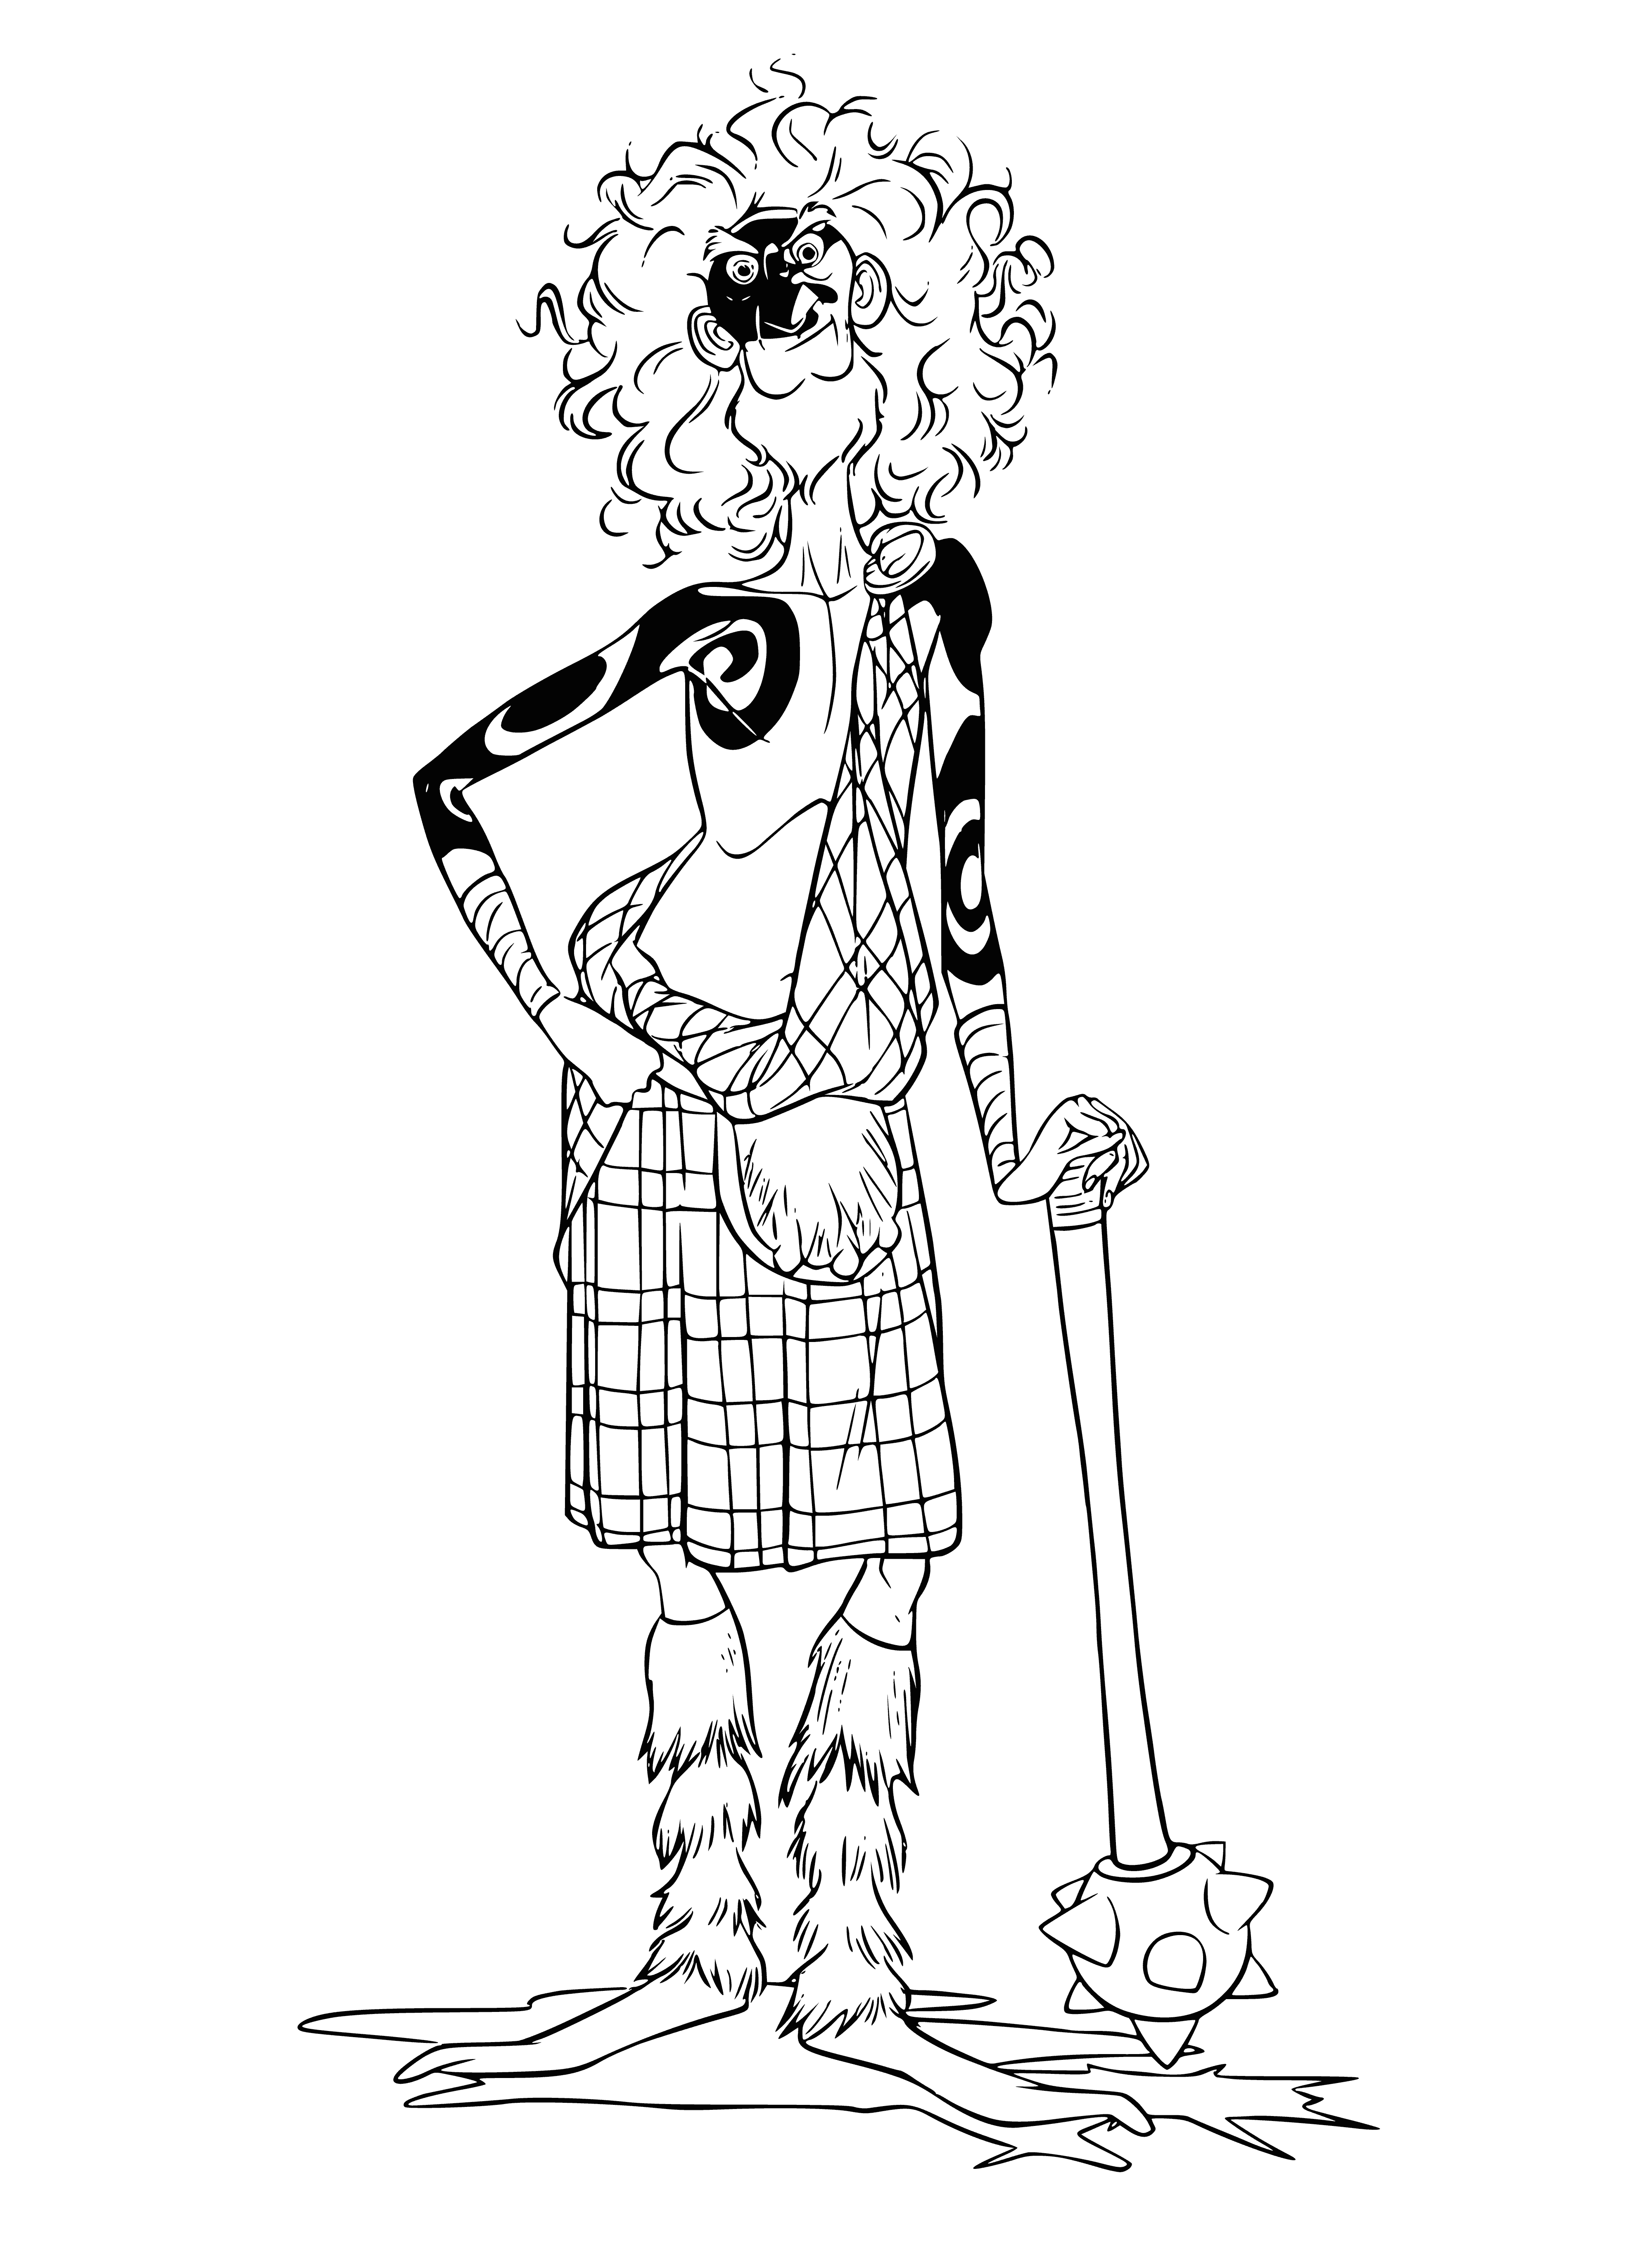 coloring page: Young man wearing kilt and red jacket w/ sword, looking into the distance.